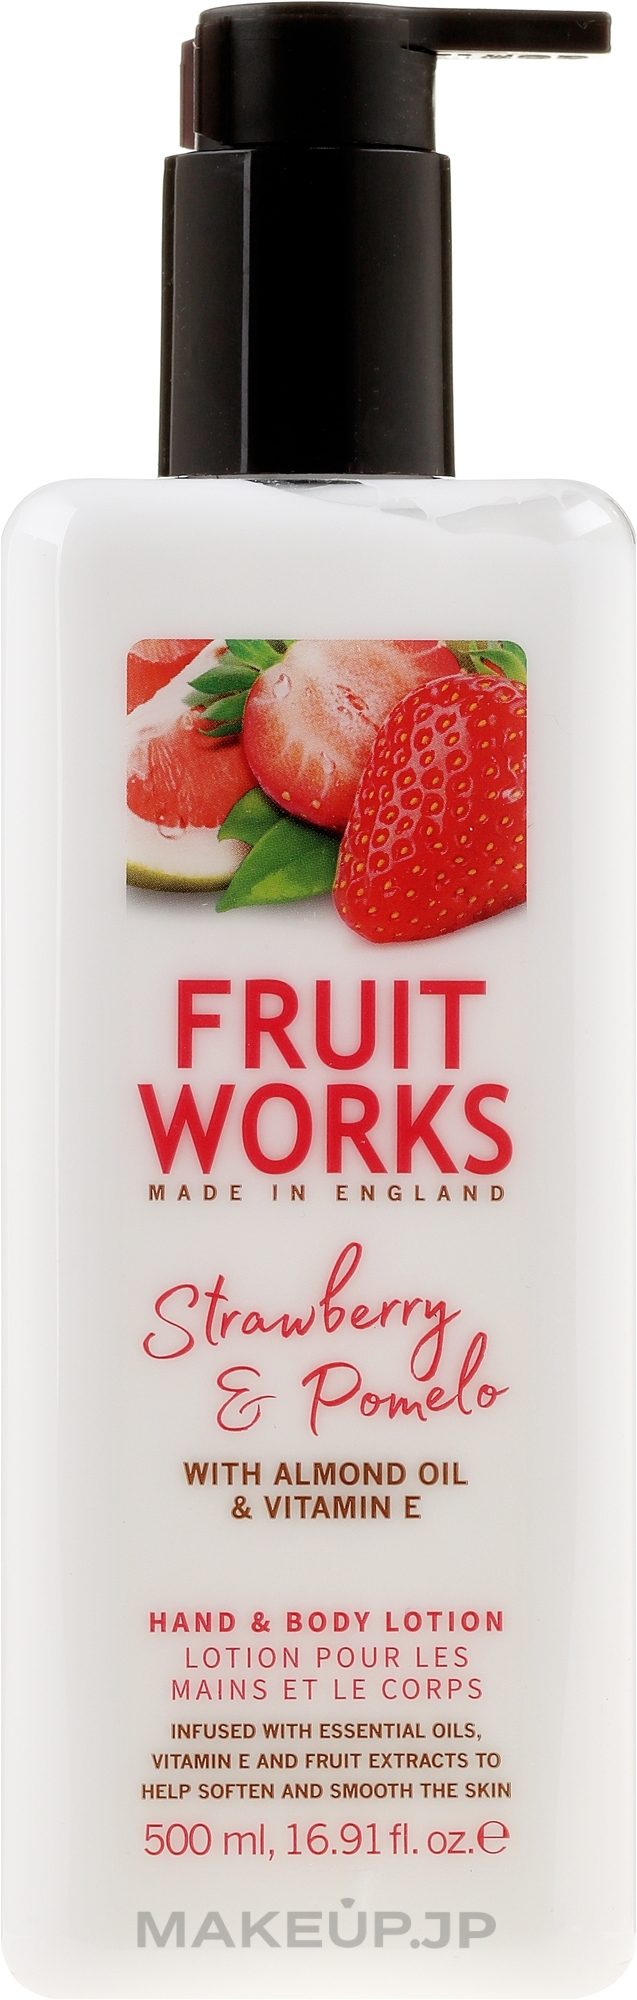 Body & Hand Lotion - Grace Cole Fruit Works Hand & Body Lotion Strawberry & Pomelo — photo 500 ml